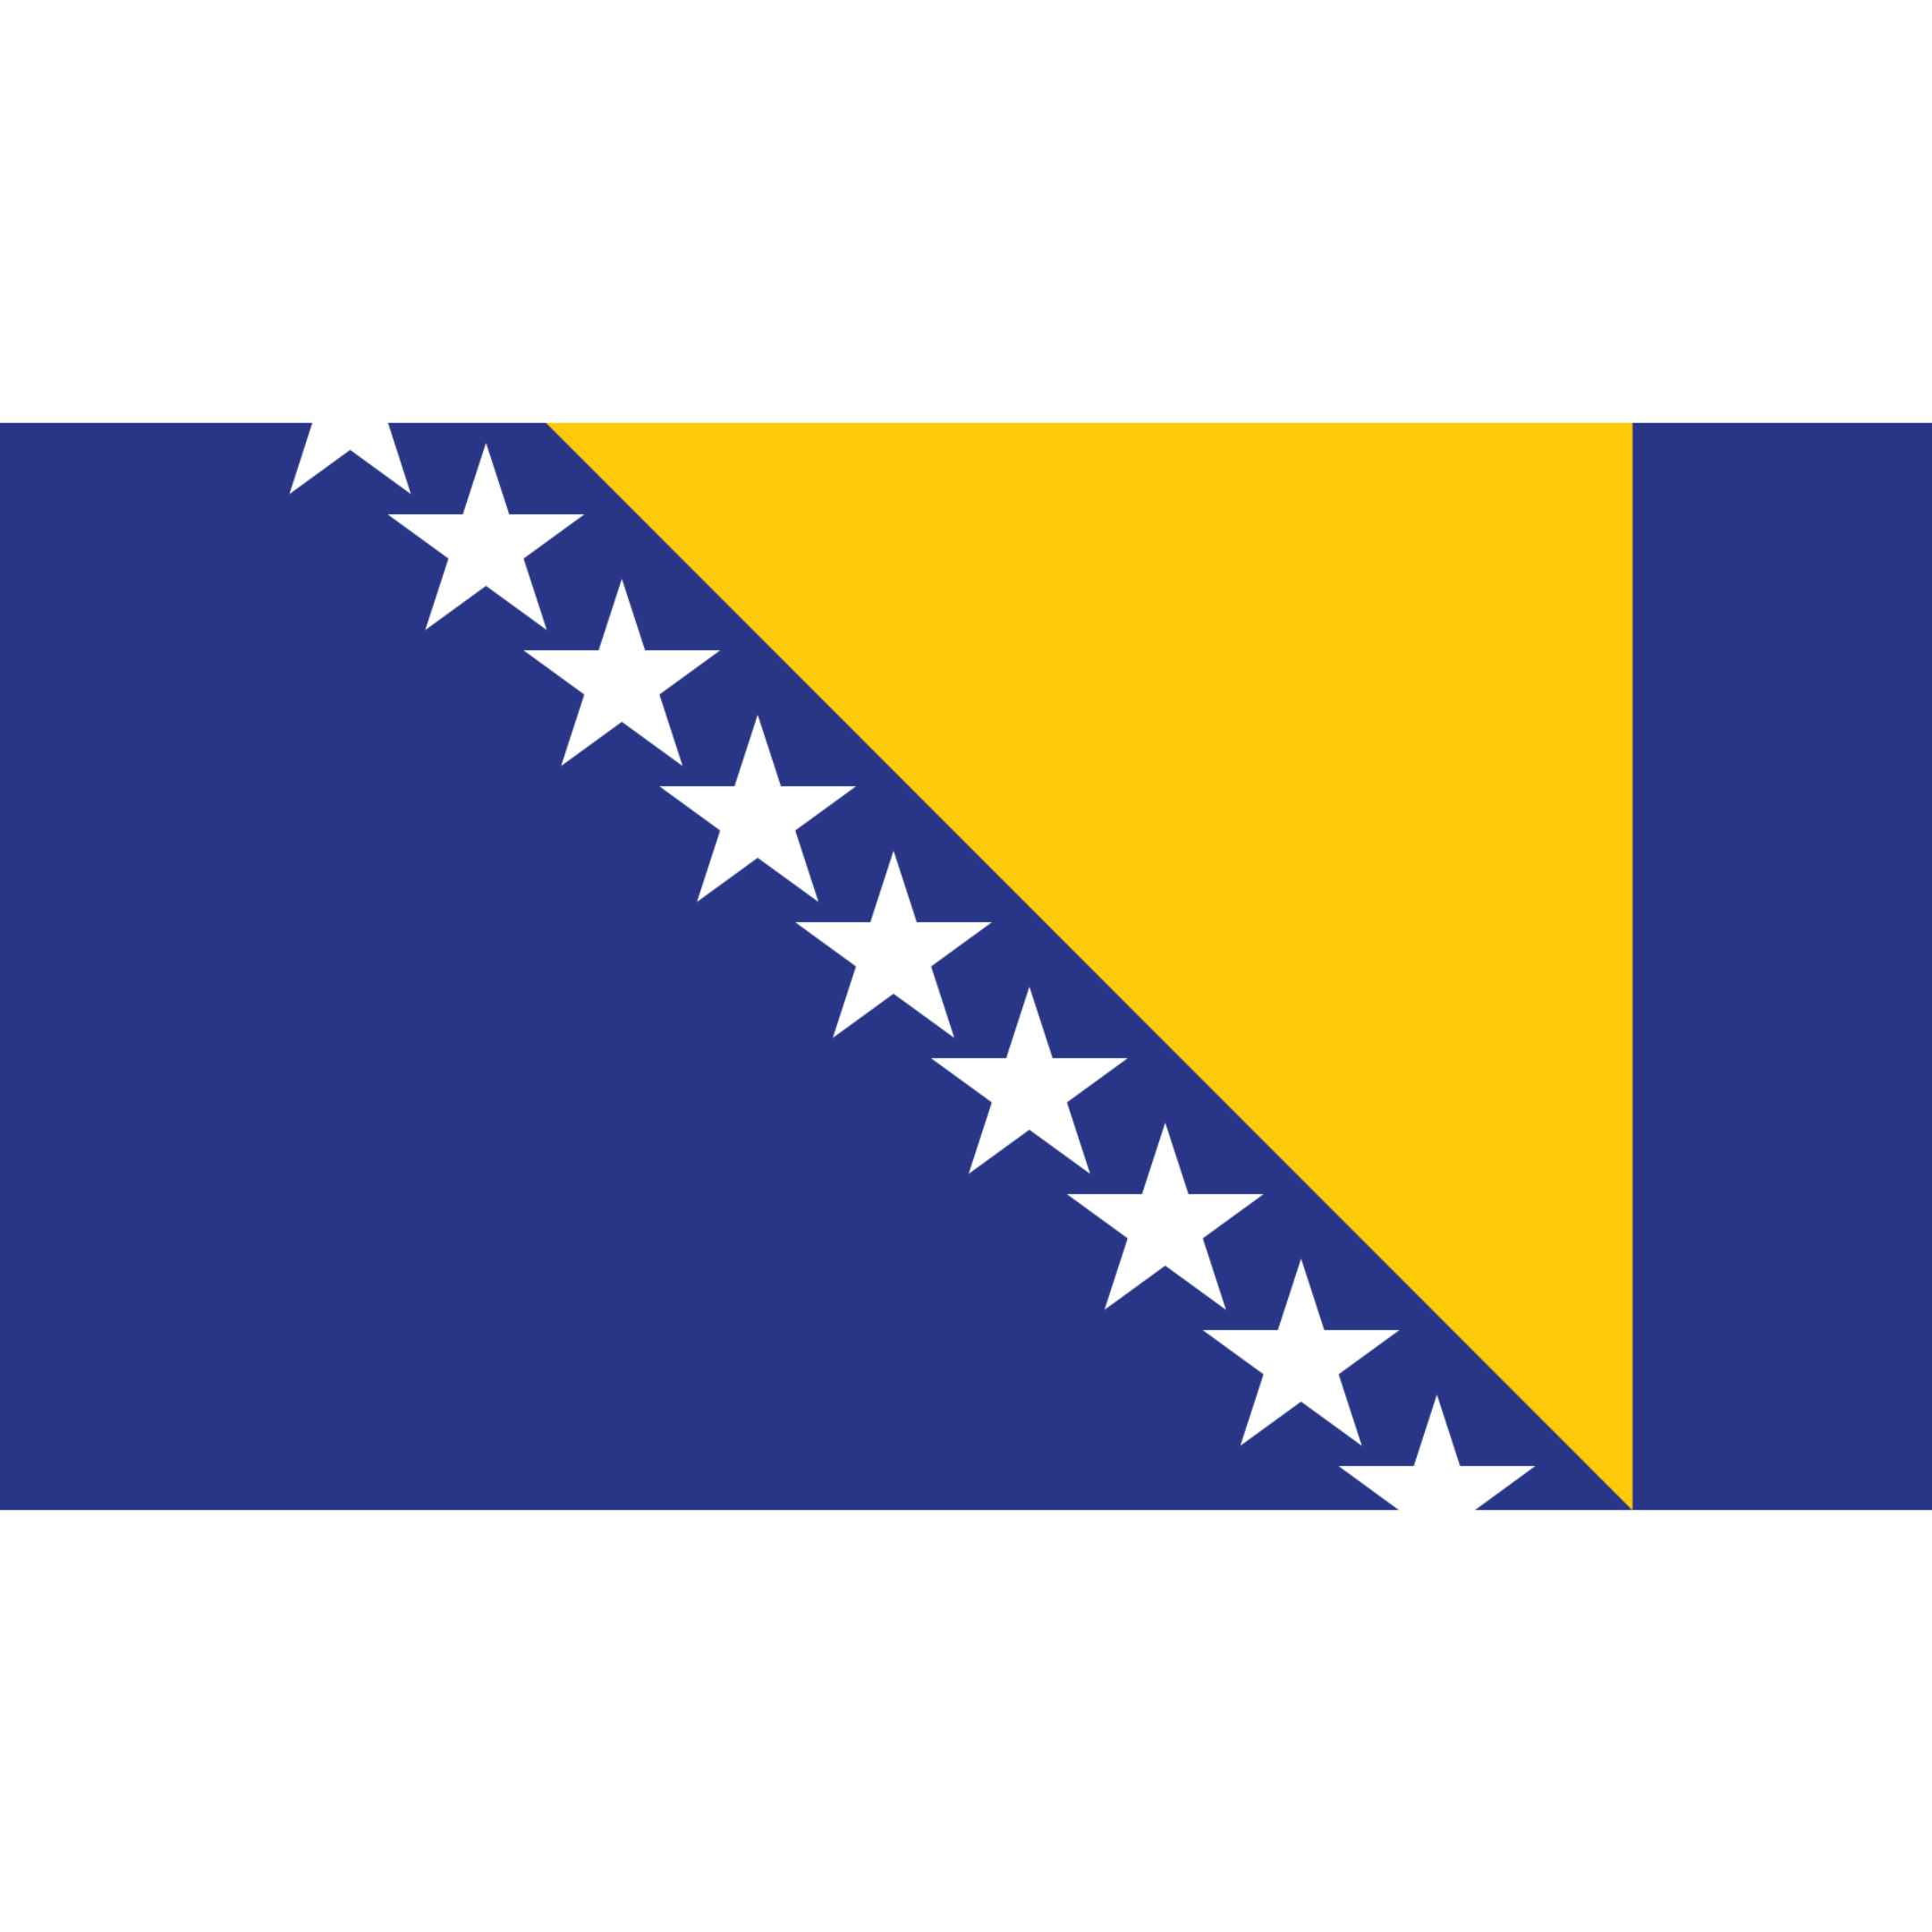 The Bosnia flag has a blue background with a yellow right angle triangle in the centre, and a diagonal line of white stars.